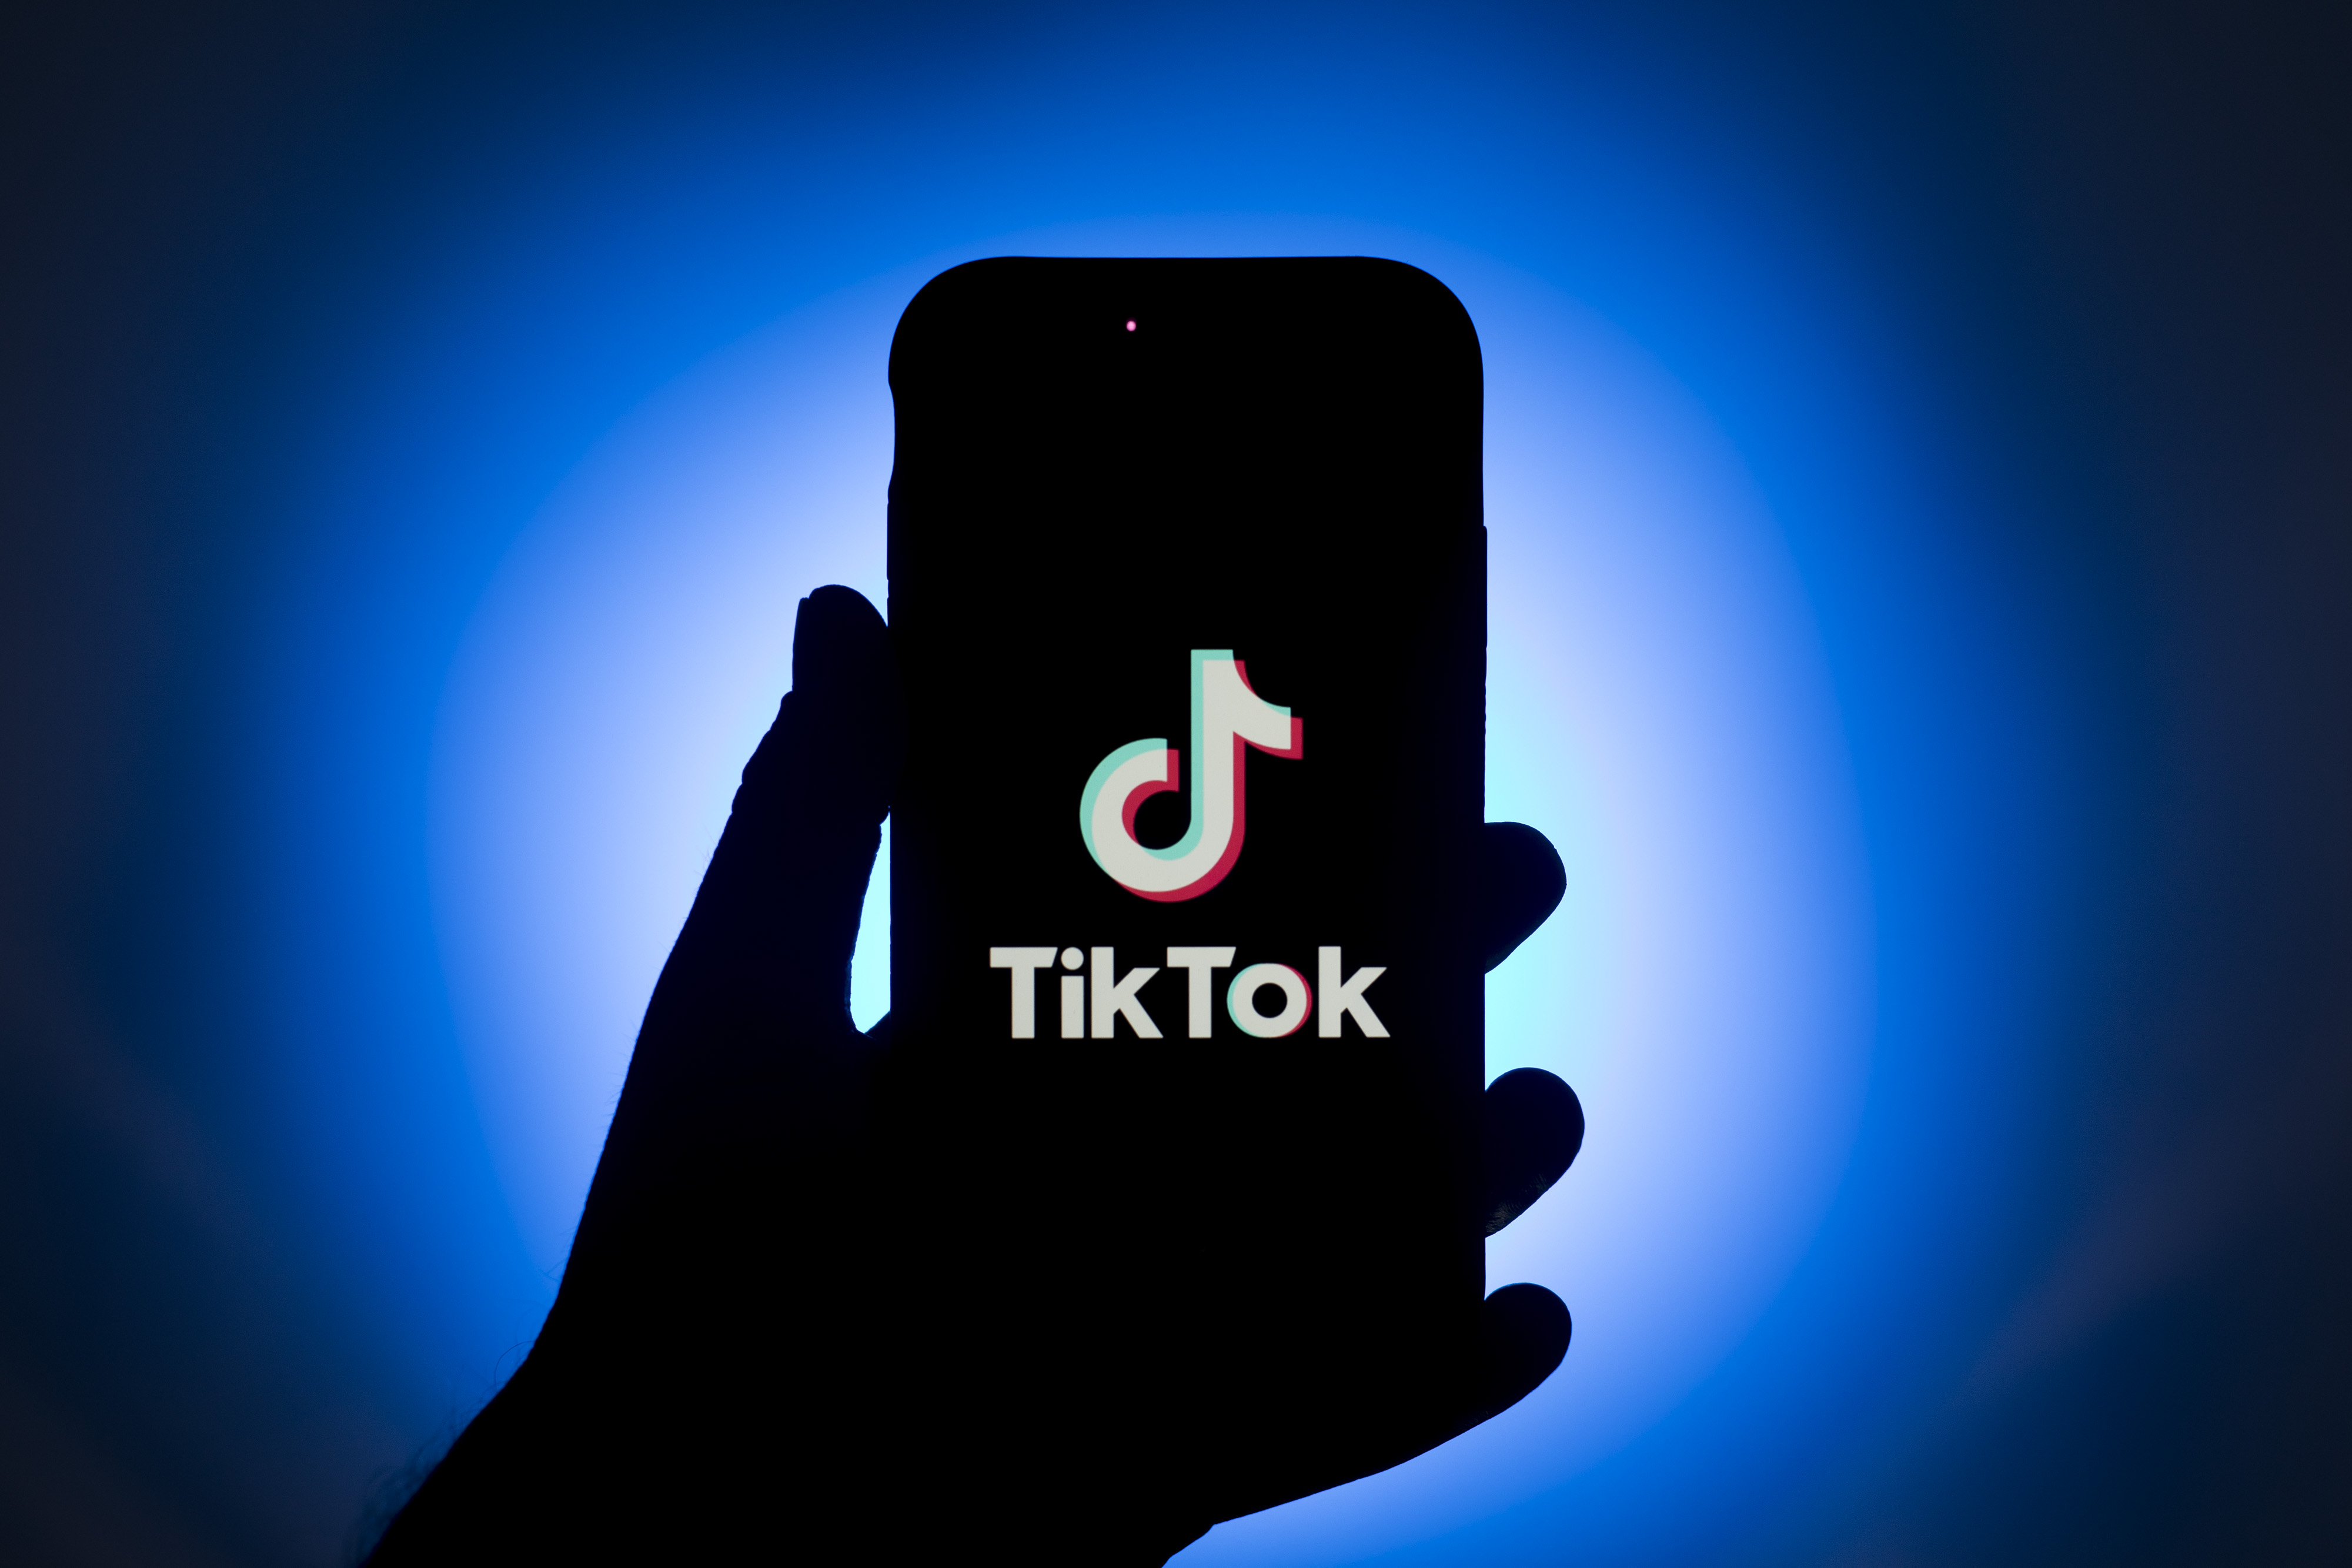 University of Florida to students, staff: Delete TikTok app from your phone